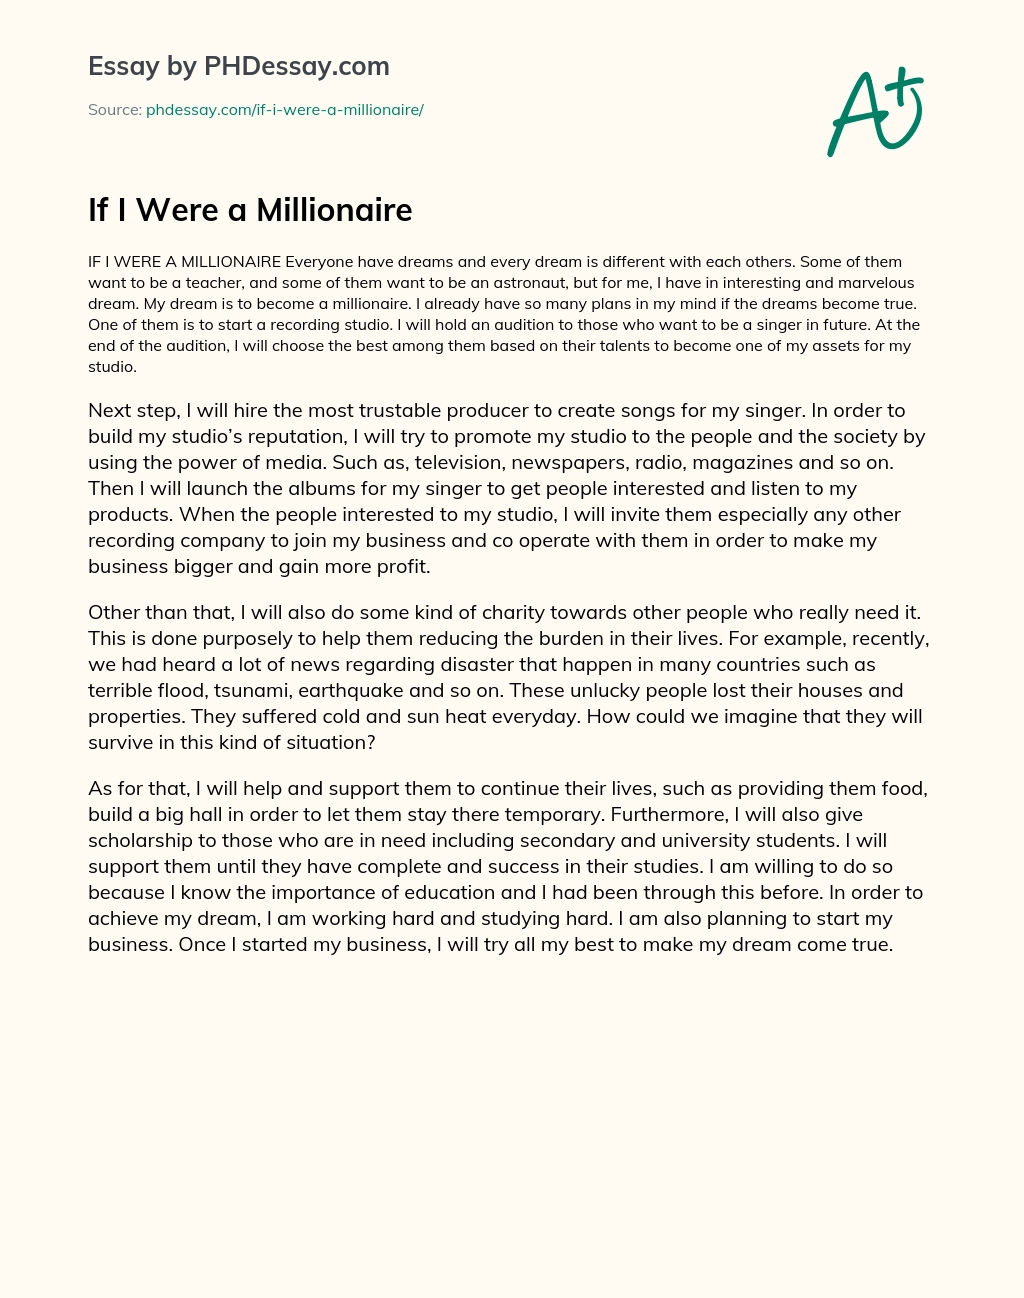 essay on if i were a millionaire